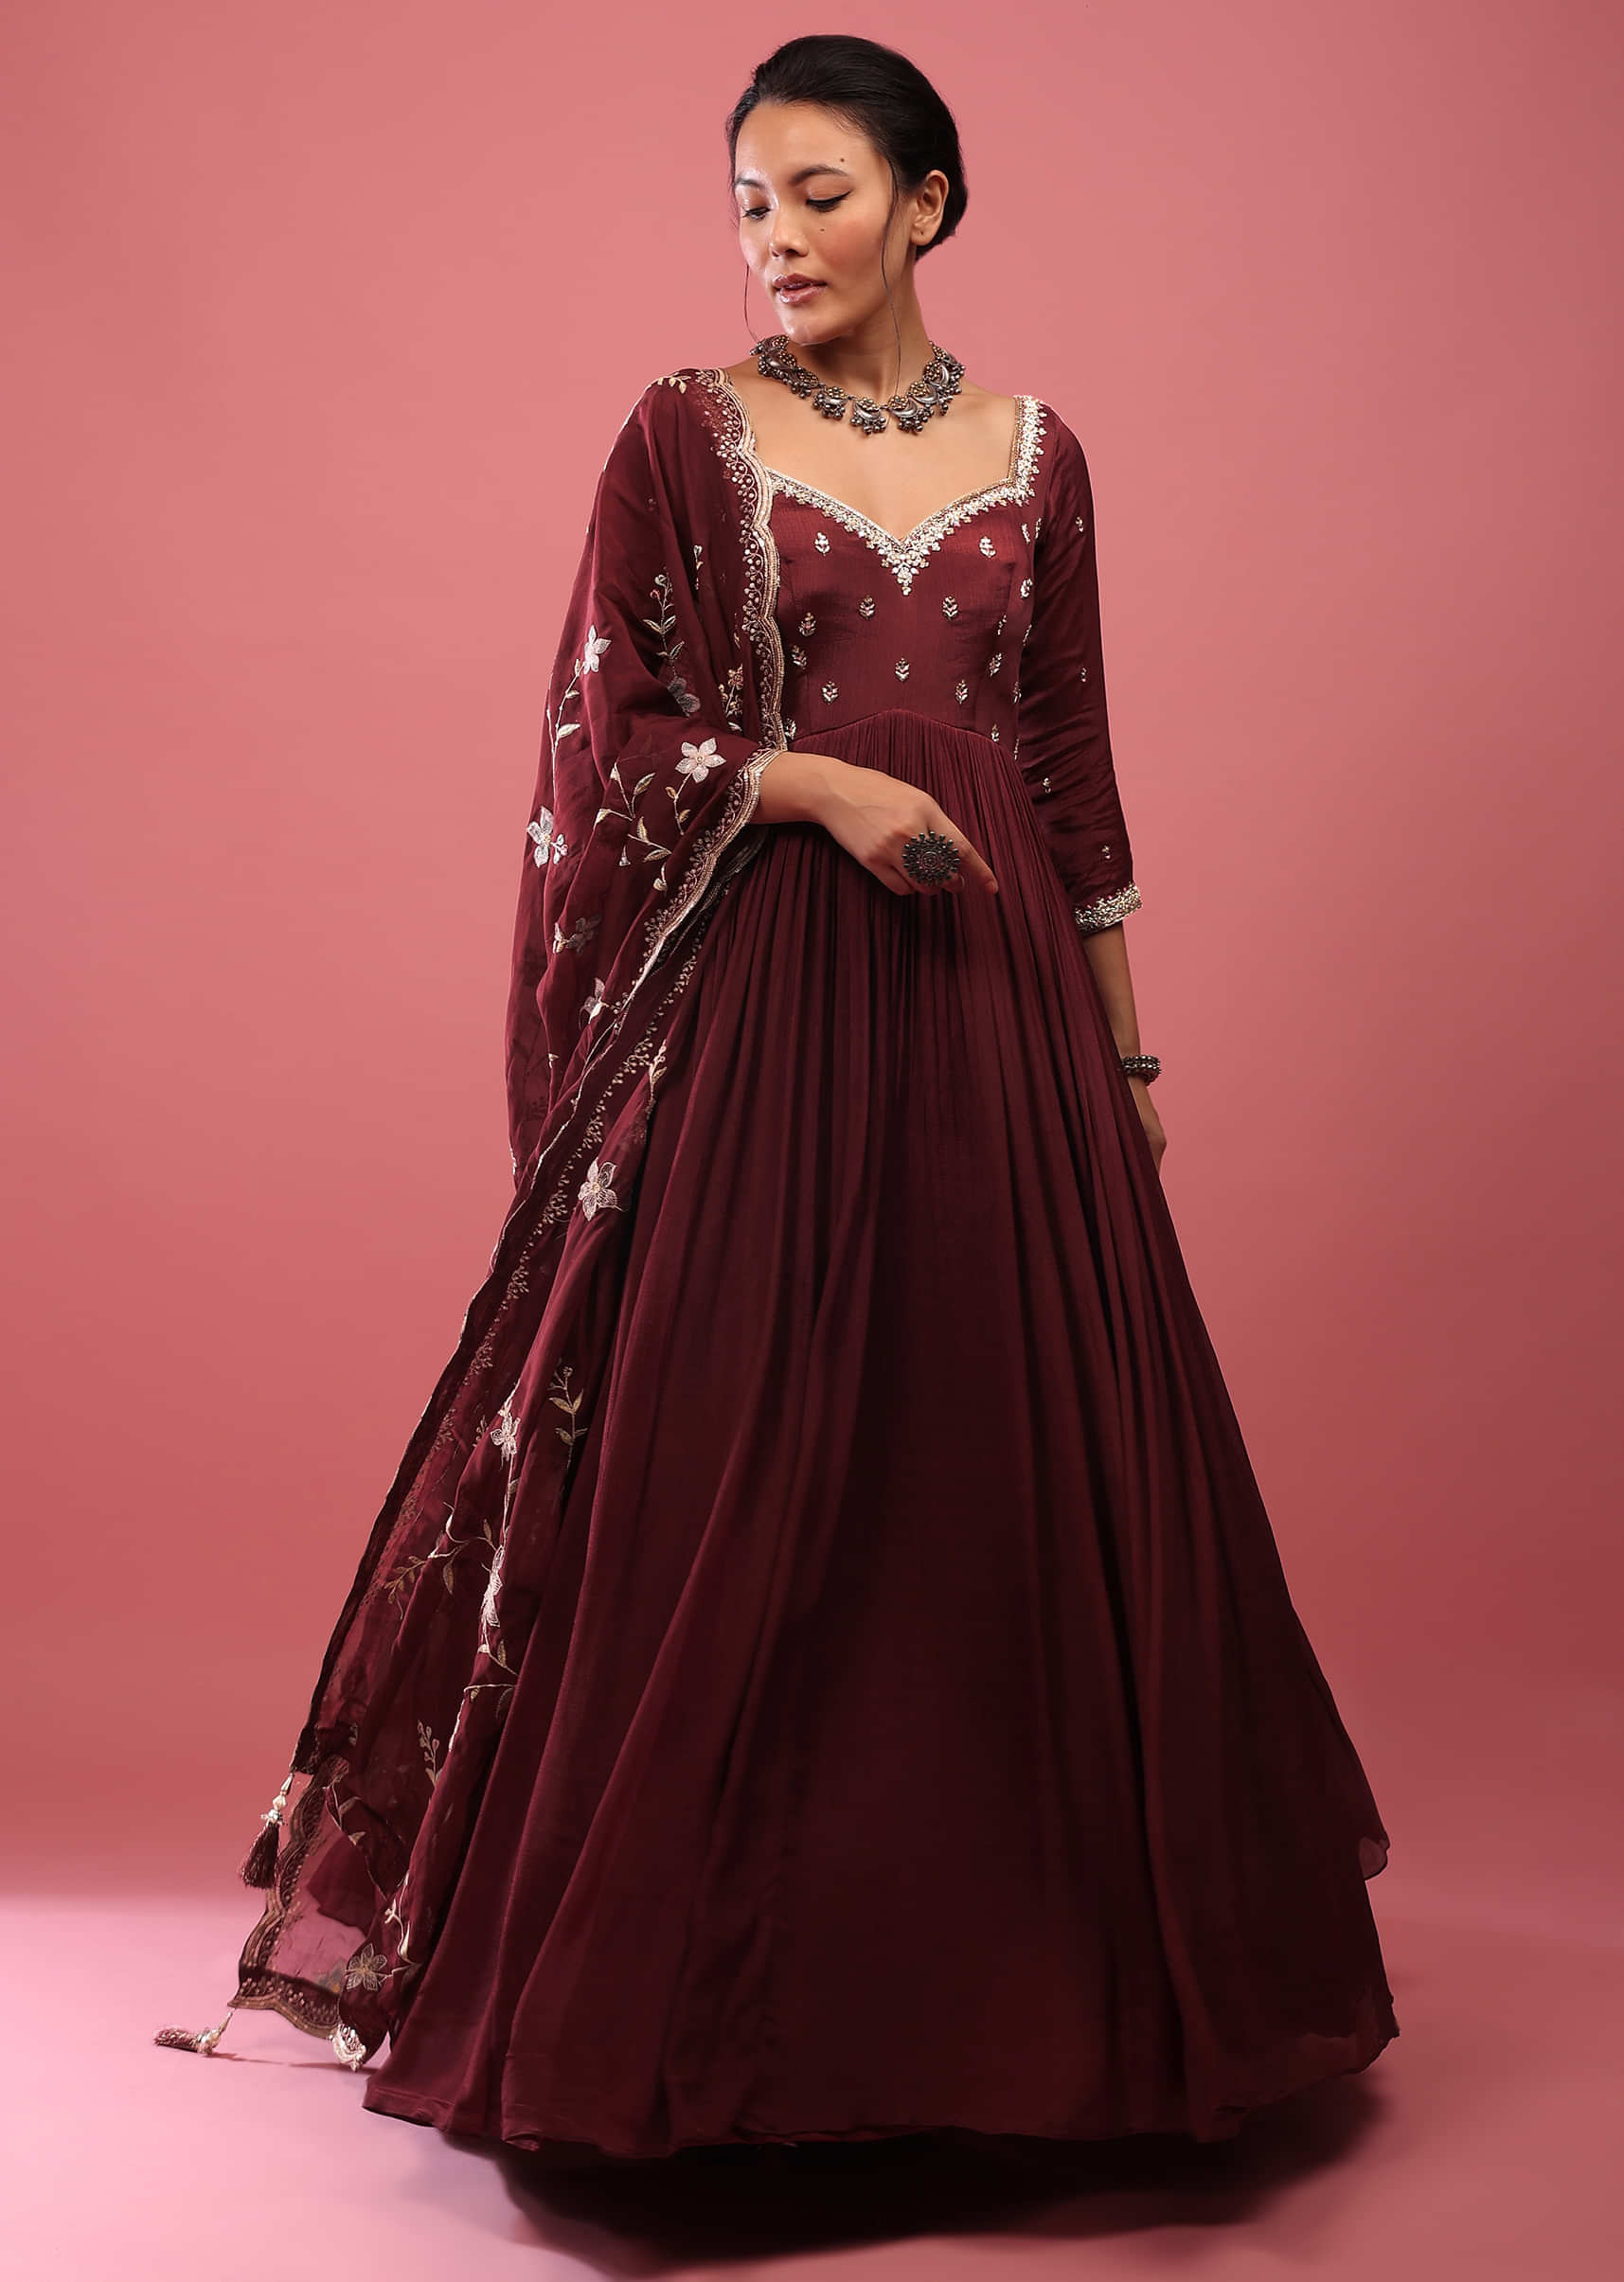 Crushed Berry Red Anarkali Suit In Chinon With Queen Style Embroidered Bodice In Zardosi Work